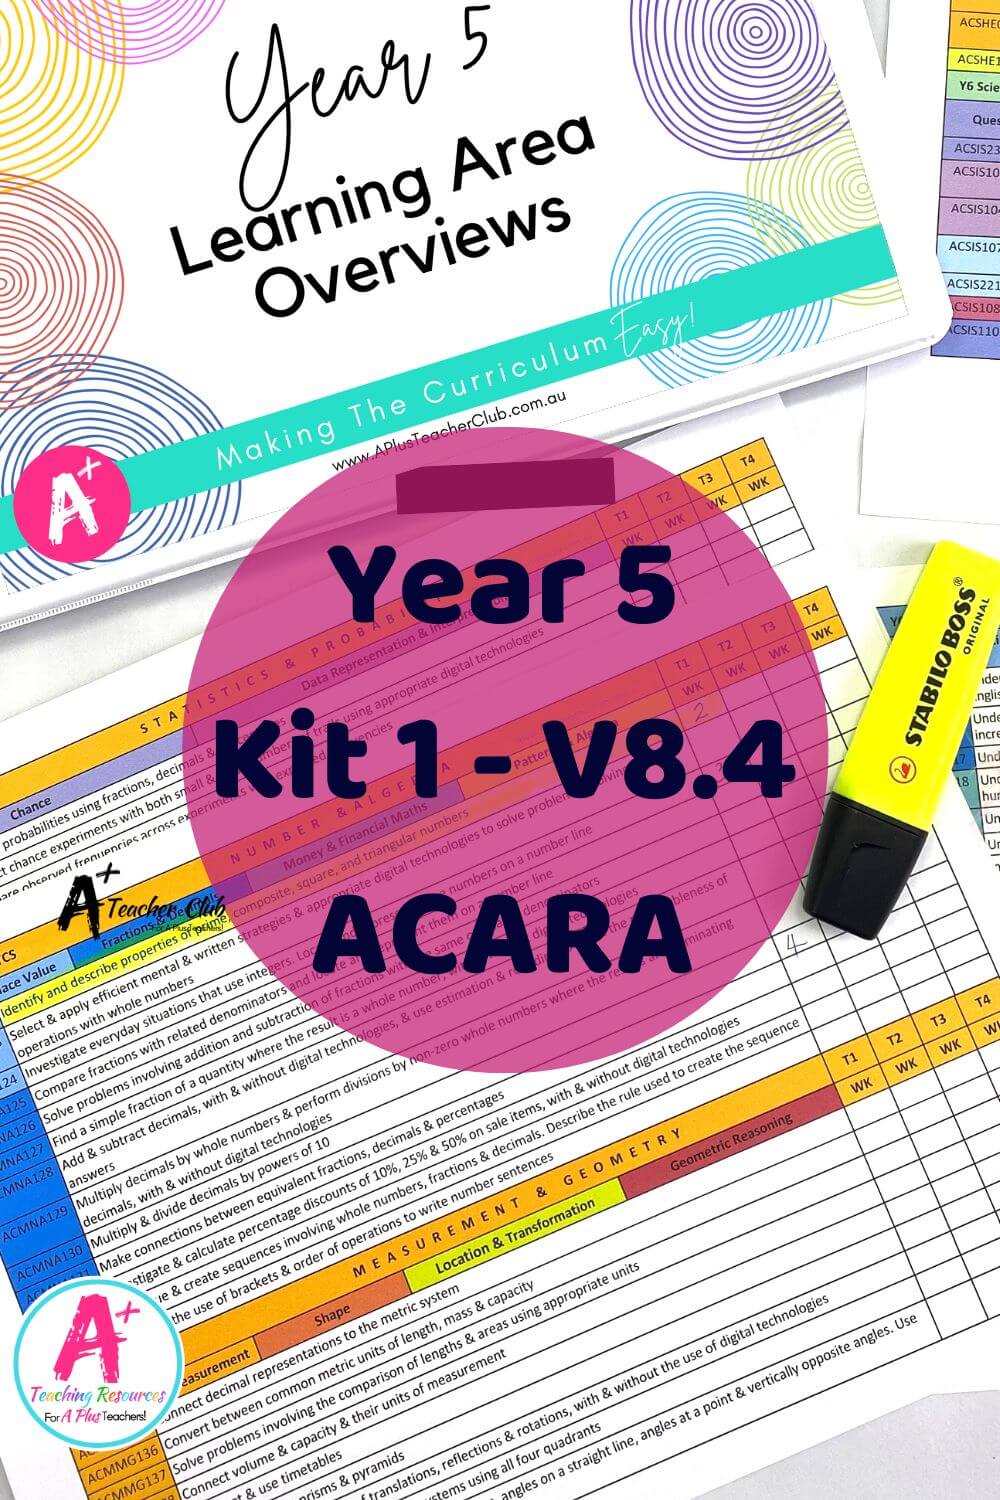 Year 5 Forward Planning Curriculum Overview ACARA V8.4